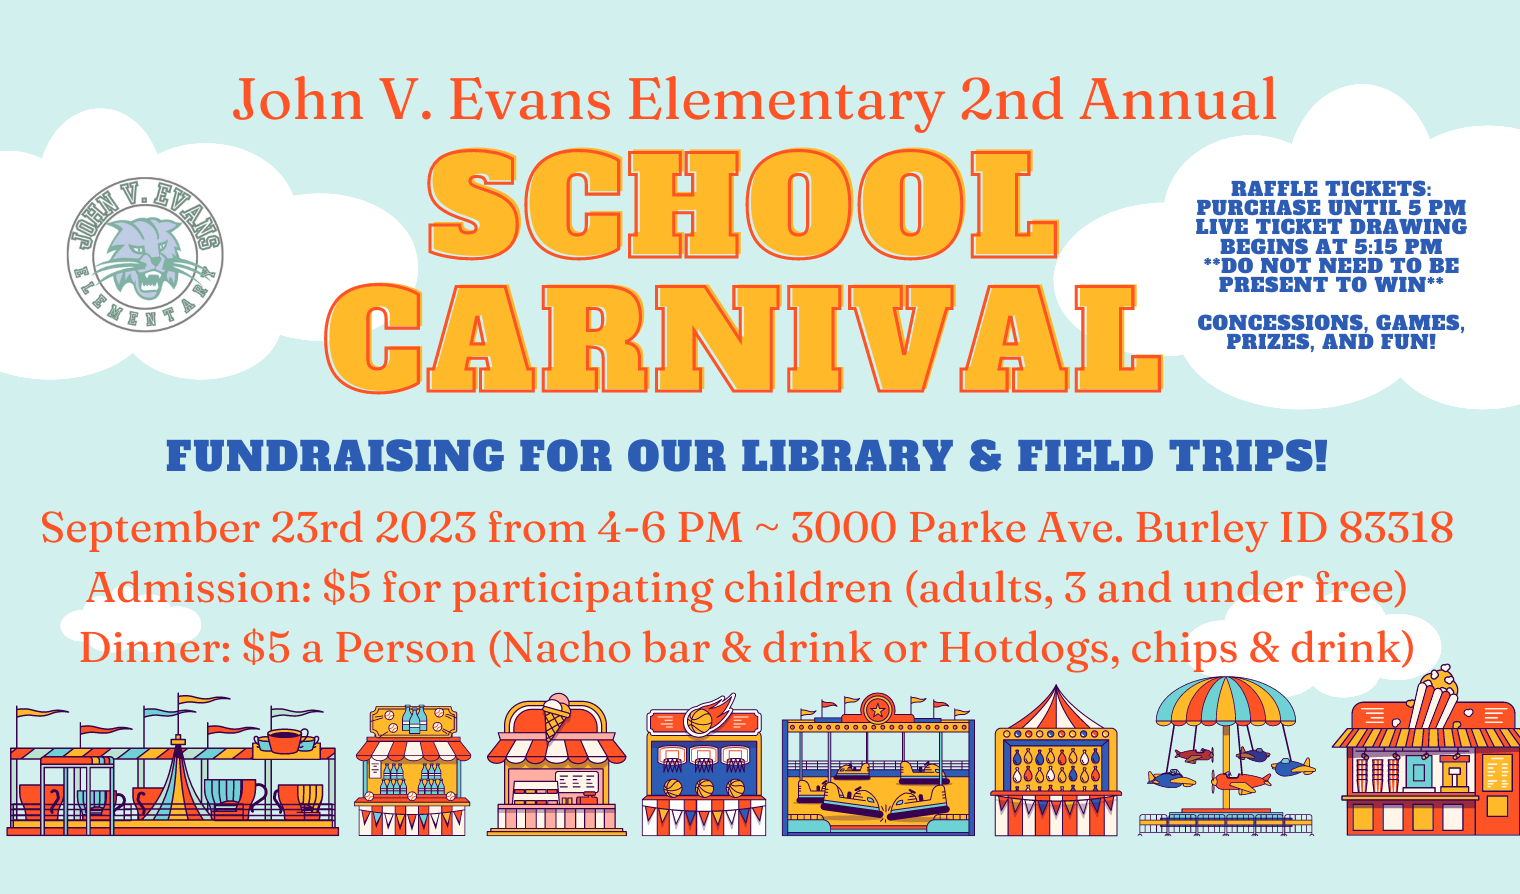 John V. Evans Elementary 2nd annual School Carnival Fundraising for our library and field trips. September 23rd 2023 from 4 through 6 pm. 3000 parke ave Burley ID 83318. Admission: five dollars for participating children. Adults and those three and under free. Dinner: five dollars a person. Choices are nacho bar and drink or hotdogs chips and drink. Raffle tickets purchase until five pm. Live ticket drawing begins at 5:15 pm. You do not need to be present to win. Concessions, games, prizes, and fun!